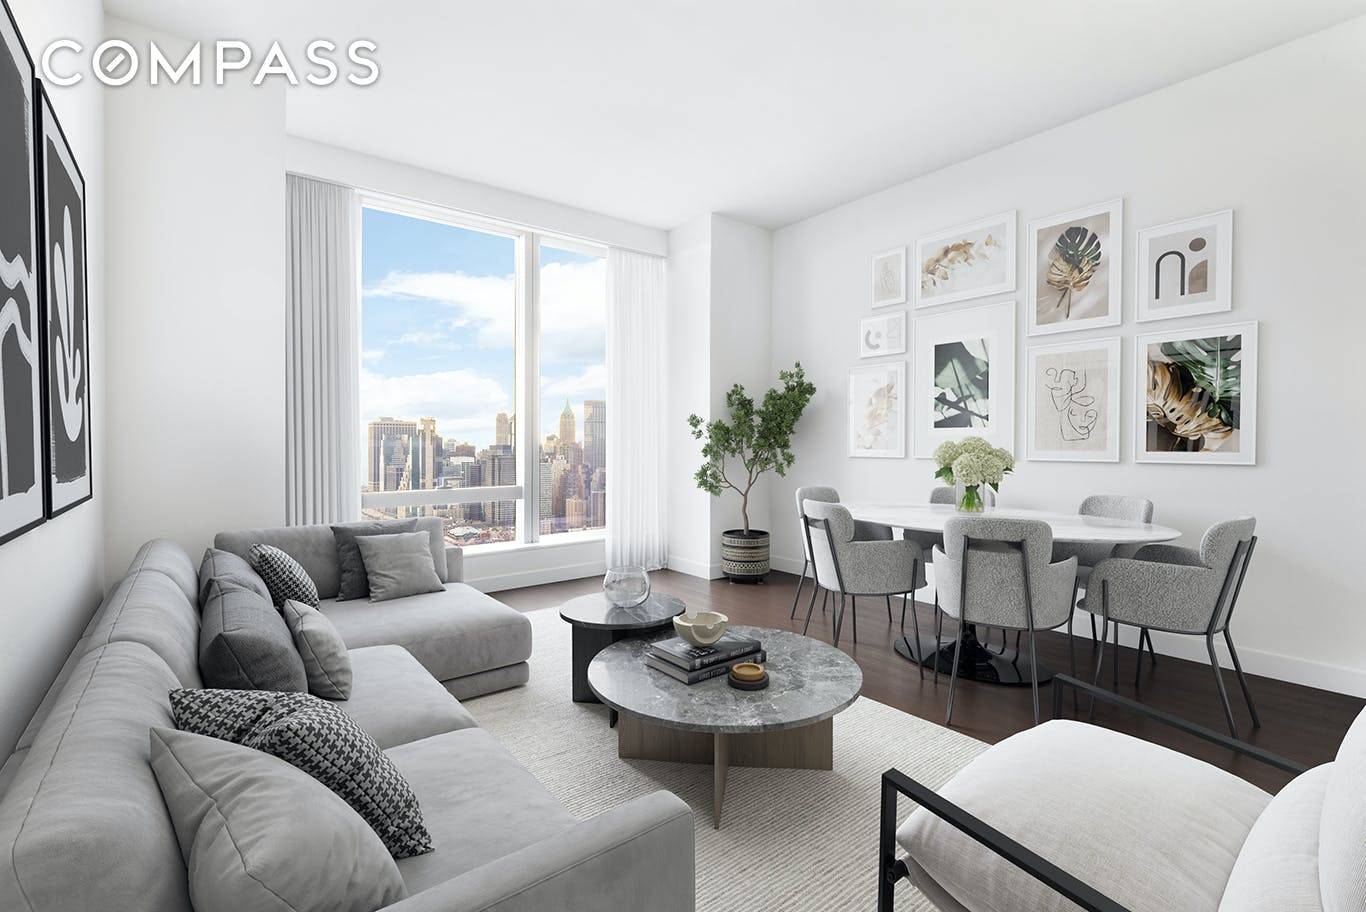 Unparalleled, iconic New York City and Brooklyn views and unrivaled luxury await you at this meticulously designed, two bedroom, two bathroom home in the sky.